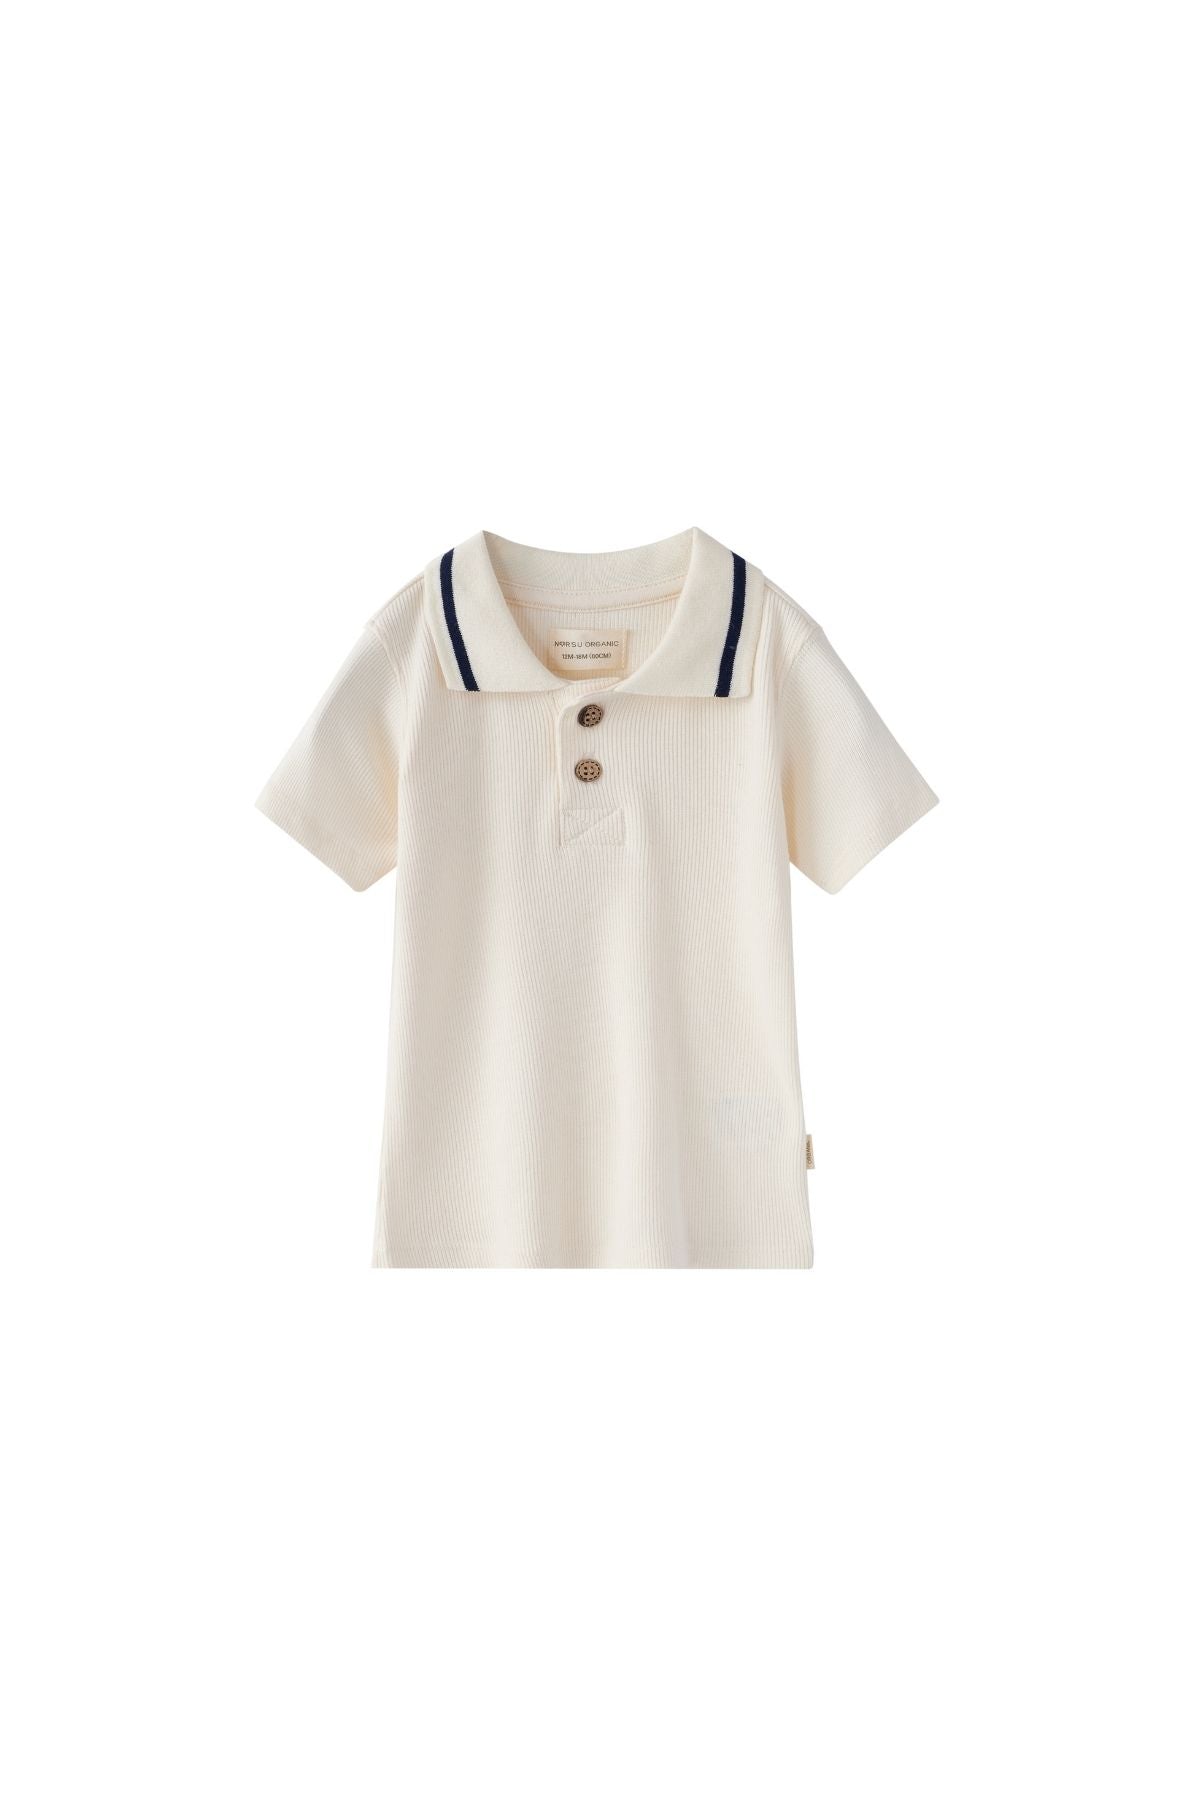 image for Toddler Bamboo Polo Shirt-Antique White